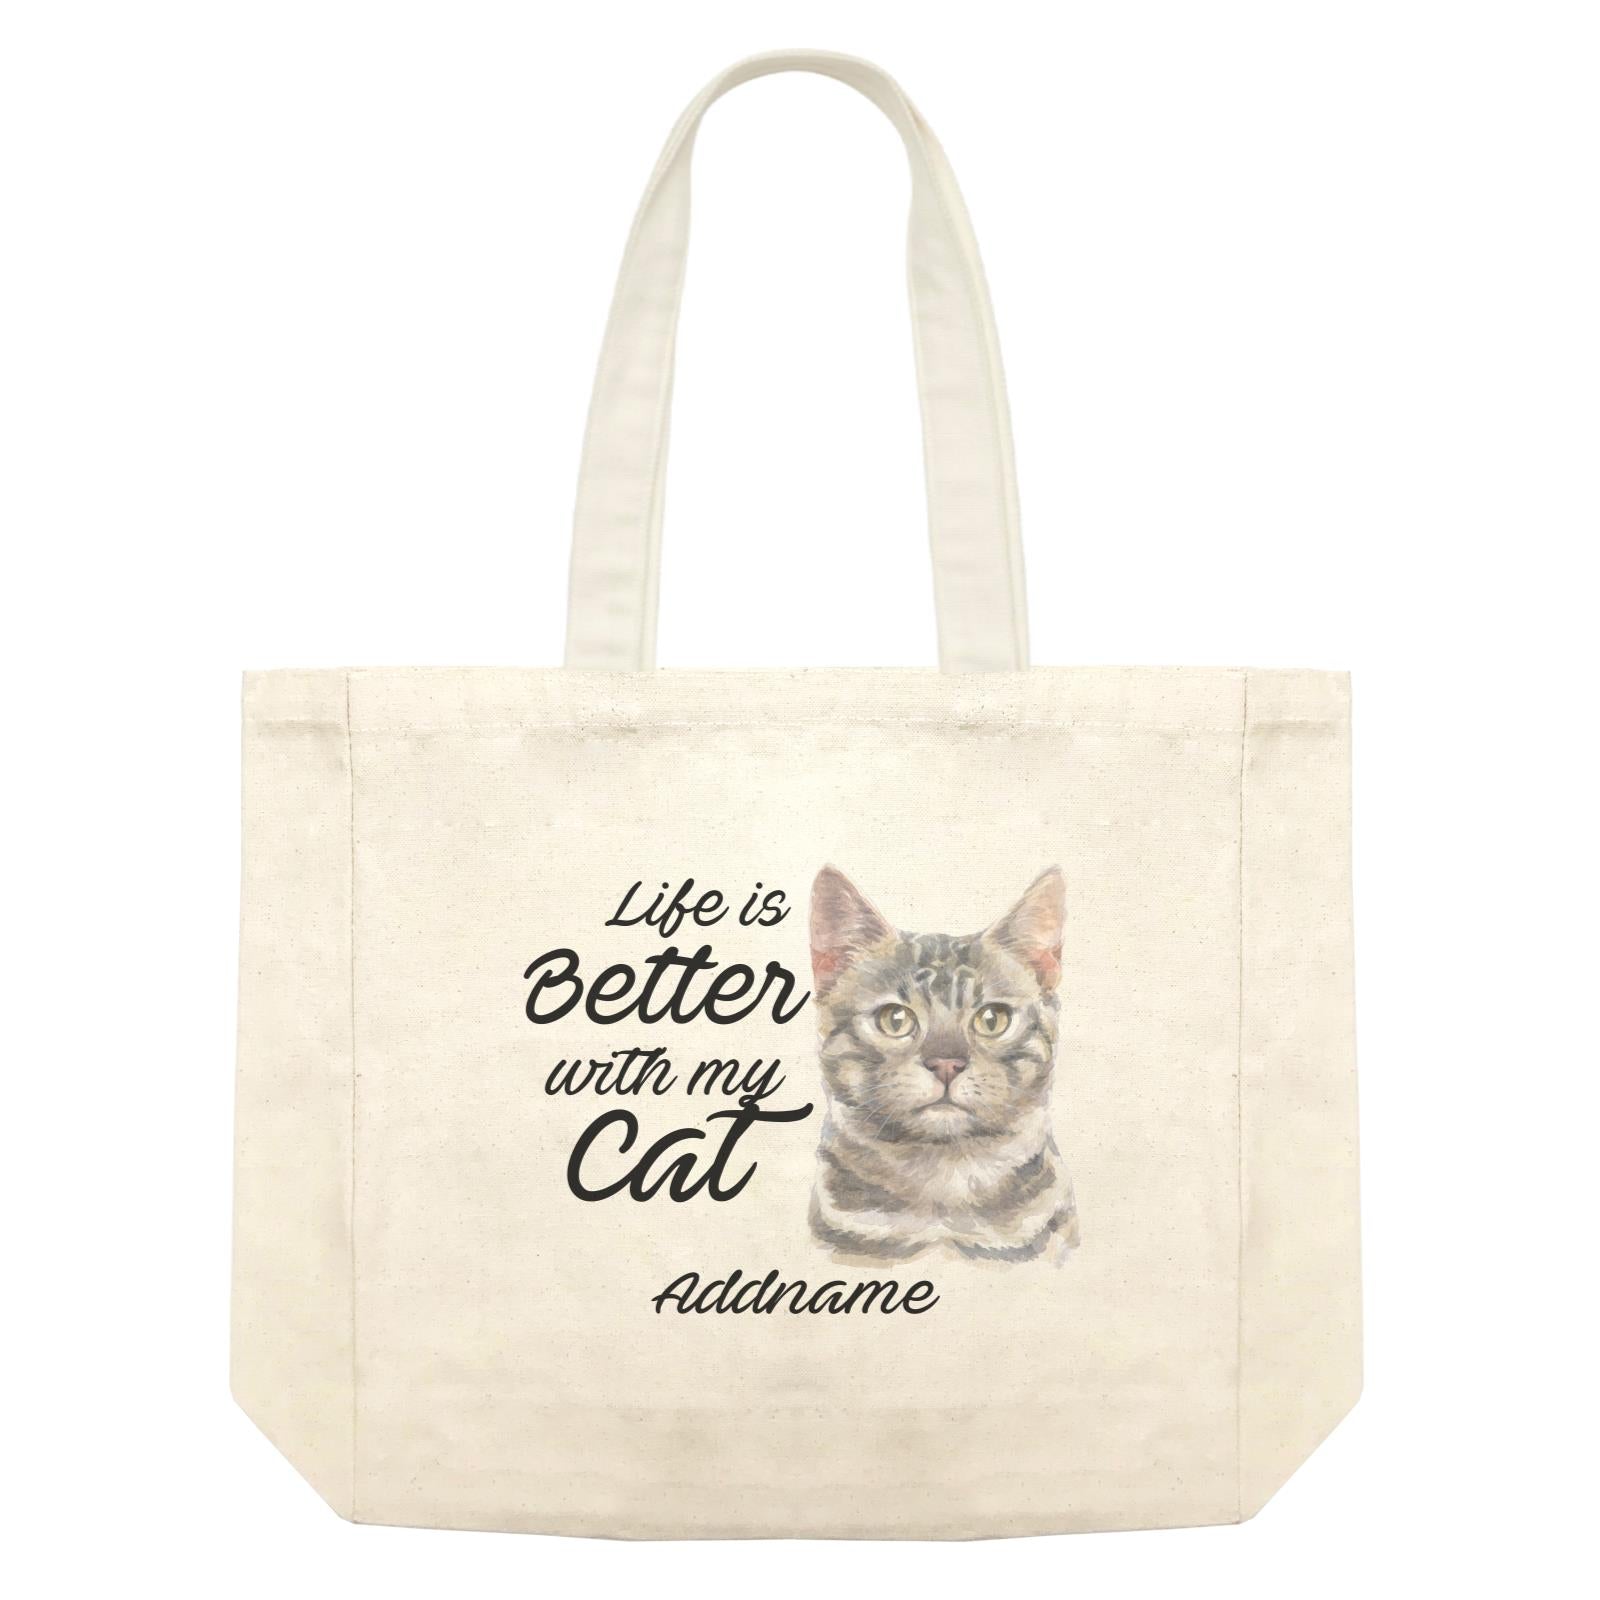 Watercolor Life is Better With My Cat Bengal Grey Addname Shopping Bag